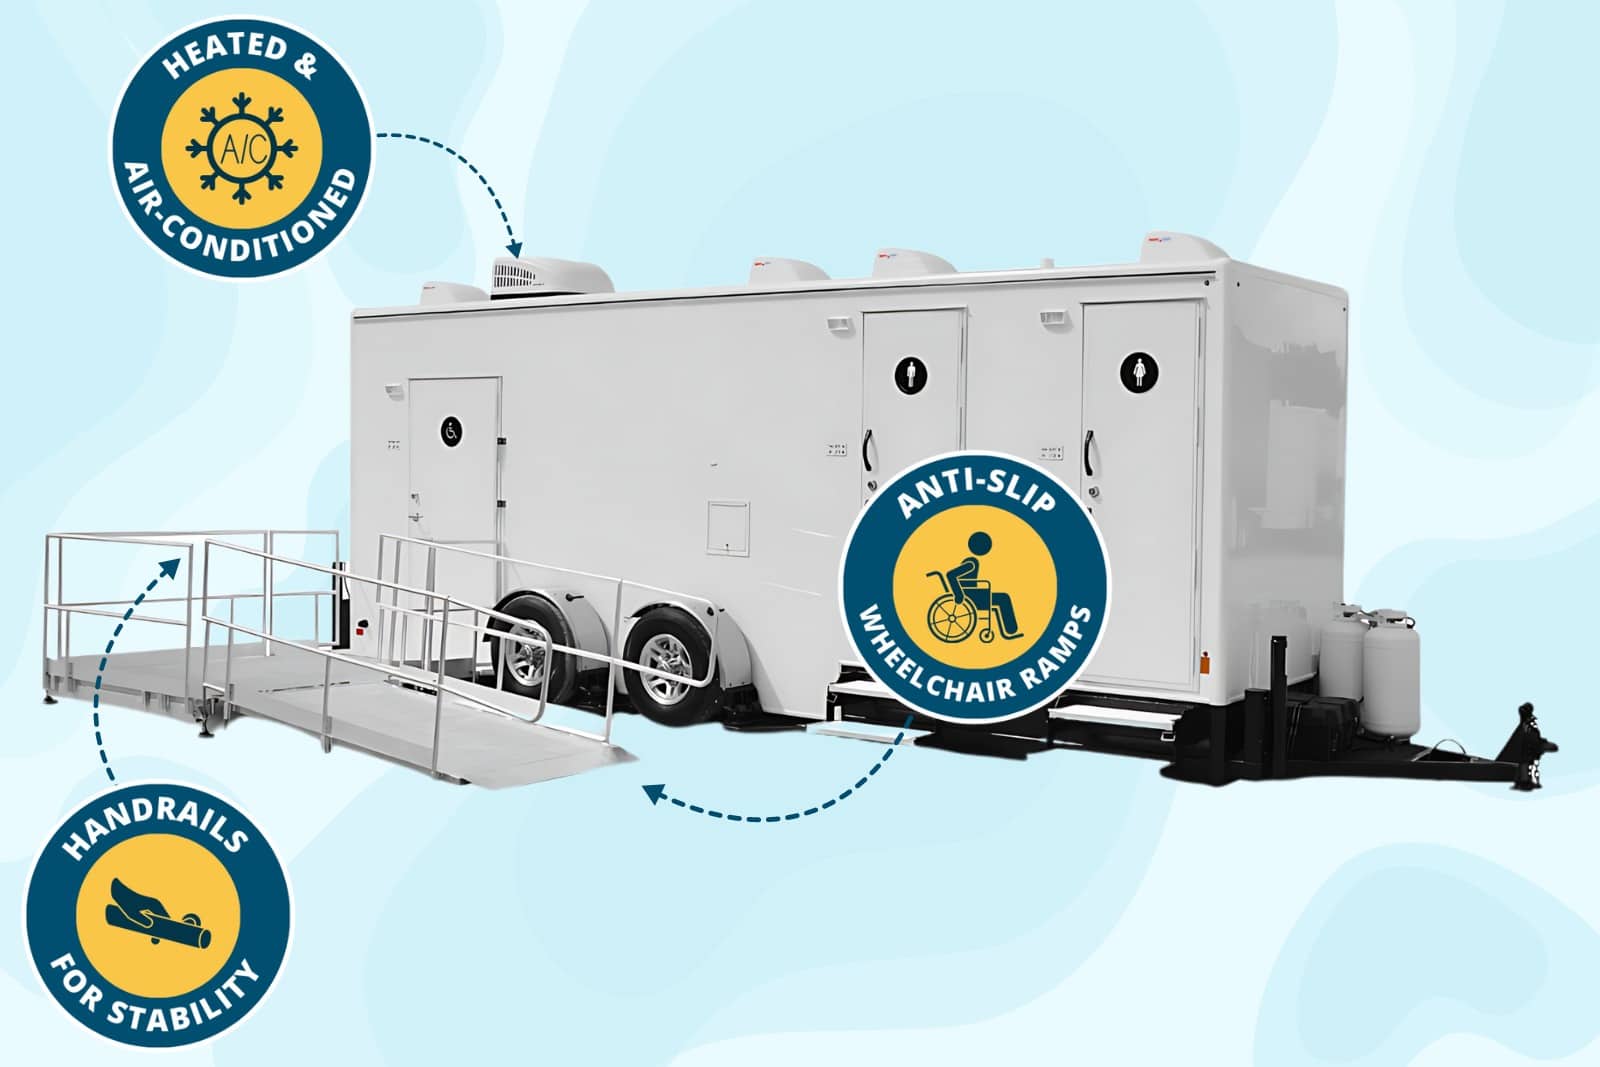 Accessible Bathroom Trailer equipped with accessibility features including a wheelchair ramp, anti-slip surface, and handrails for stability.